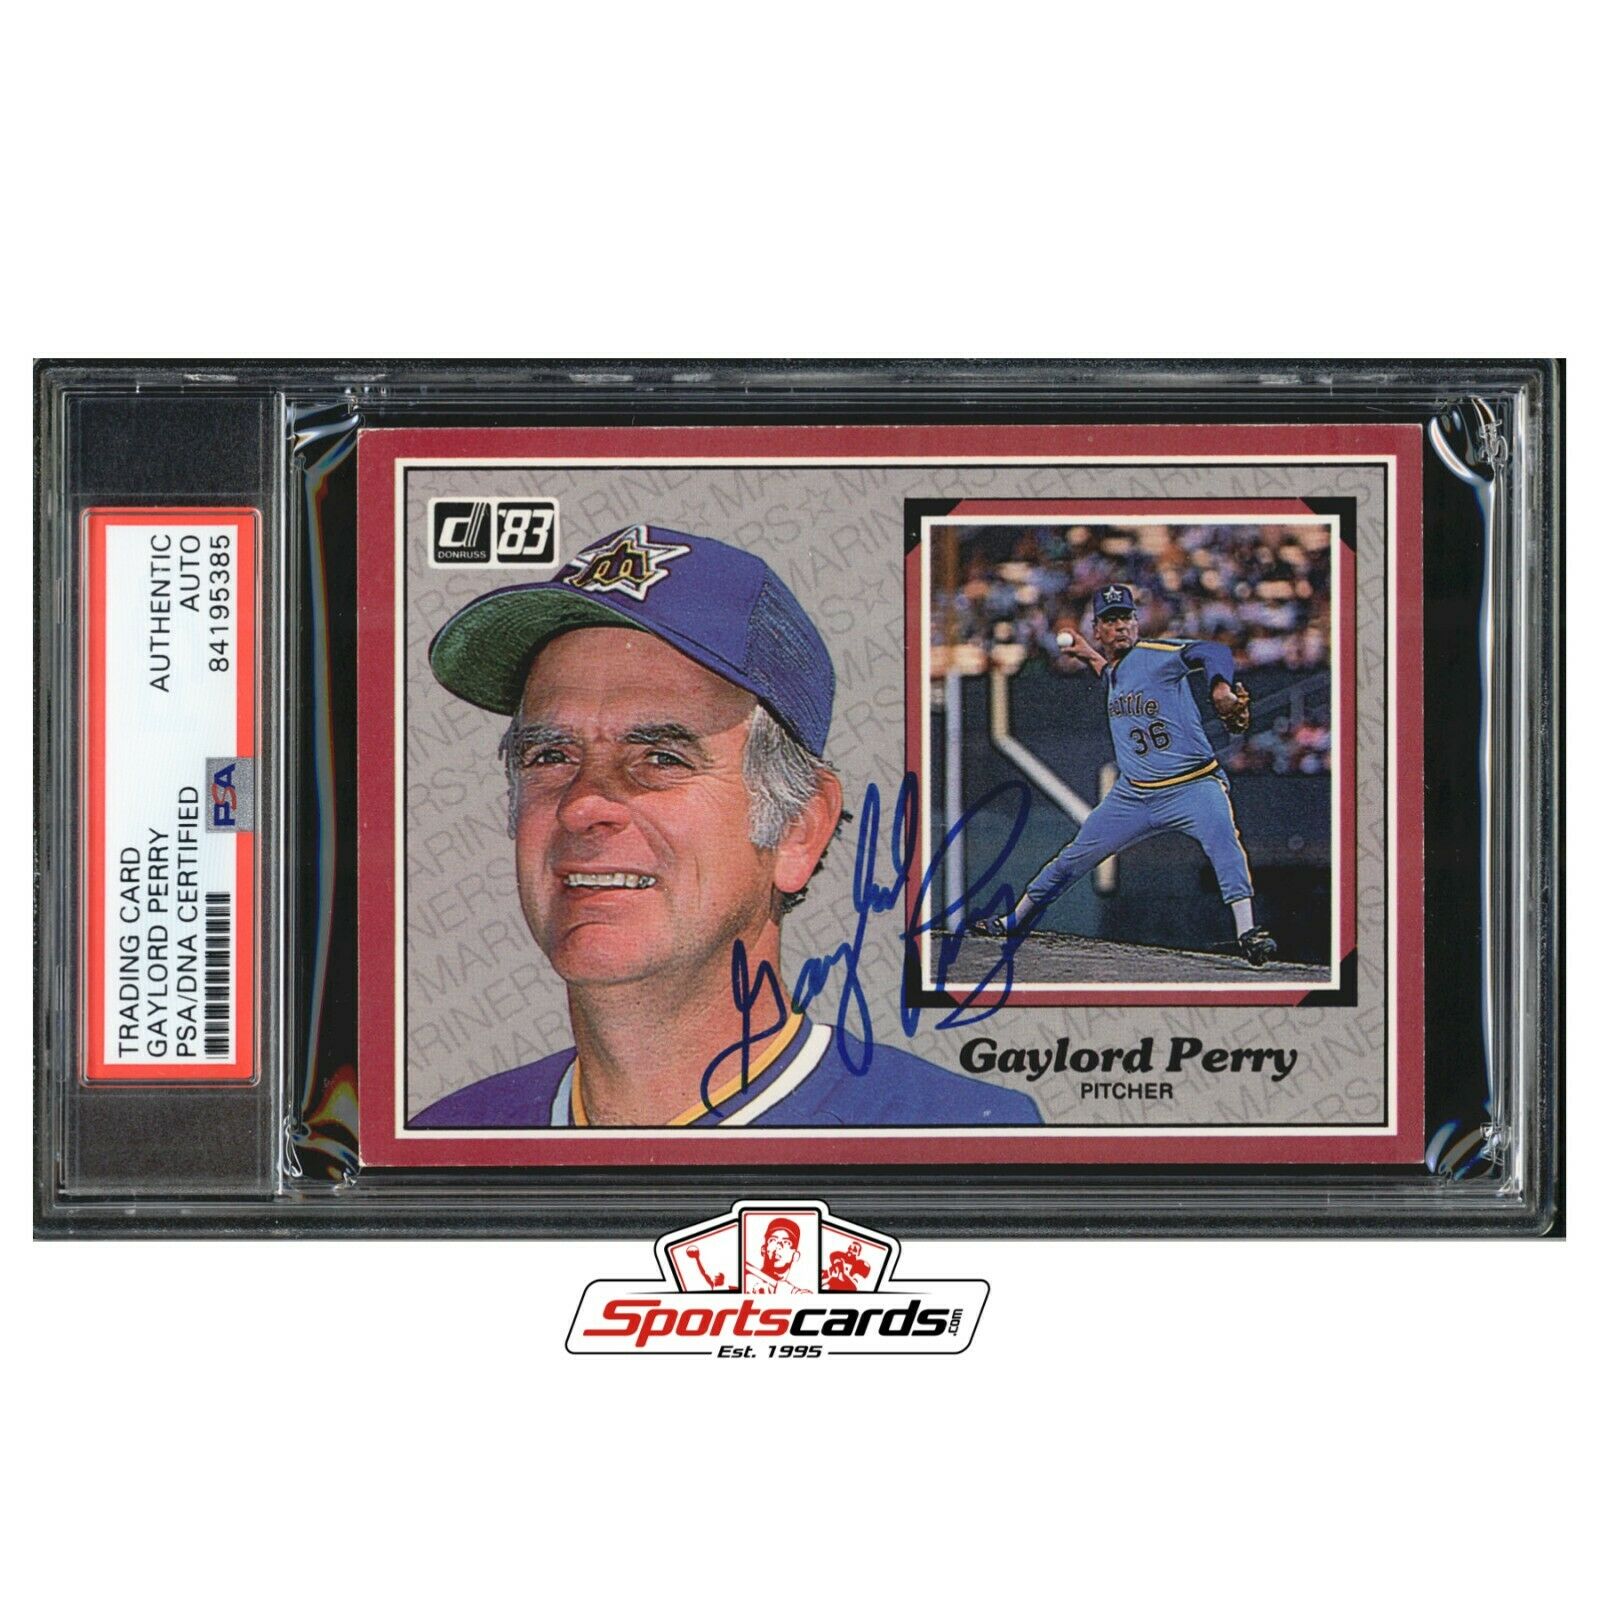 Gaylord Perry Signed 1983 Donruss Oversize Trading Card PSA/DNA Mariners Auto